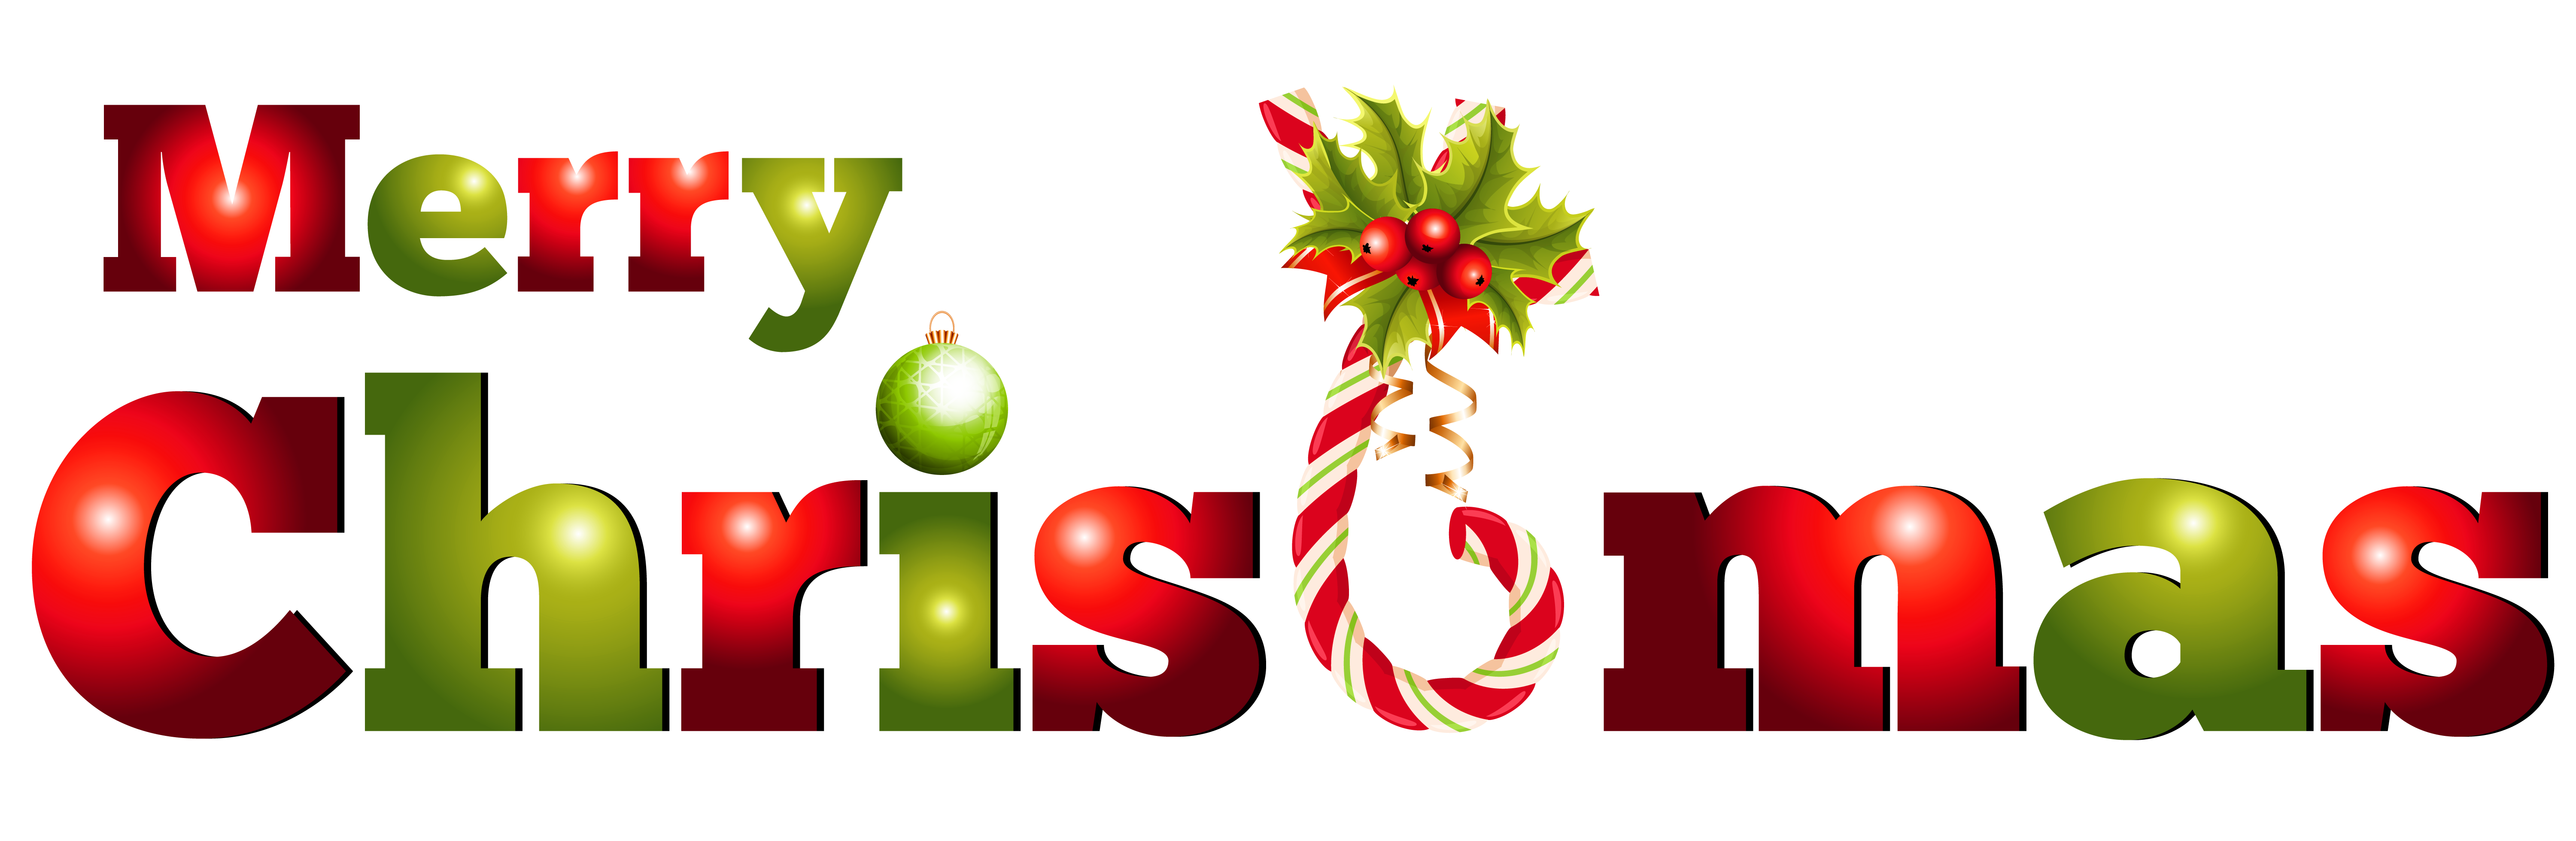 74 Free Christmas Clip Art Cliparting